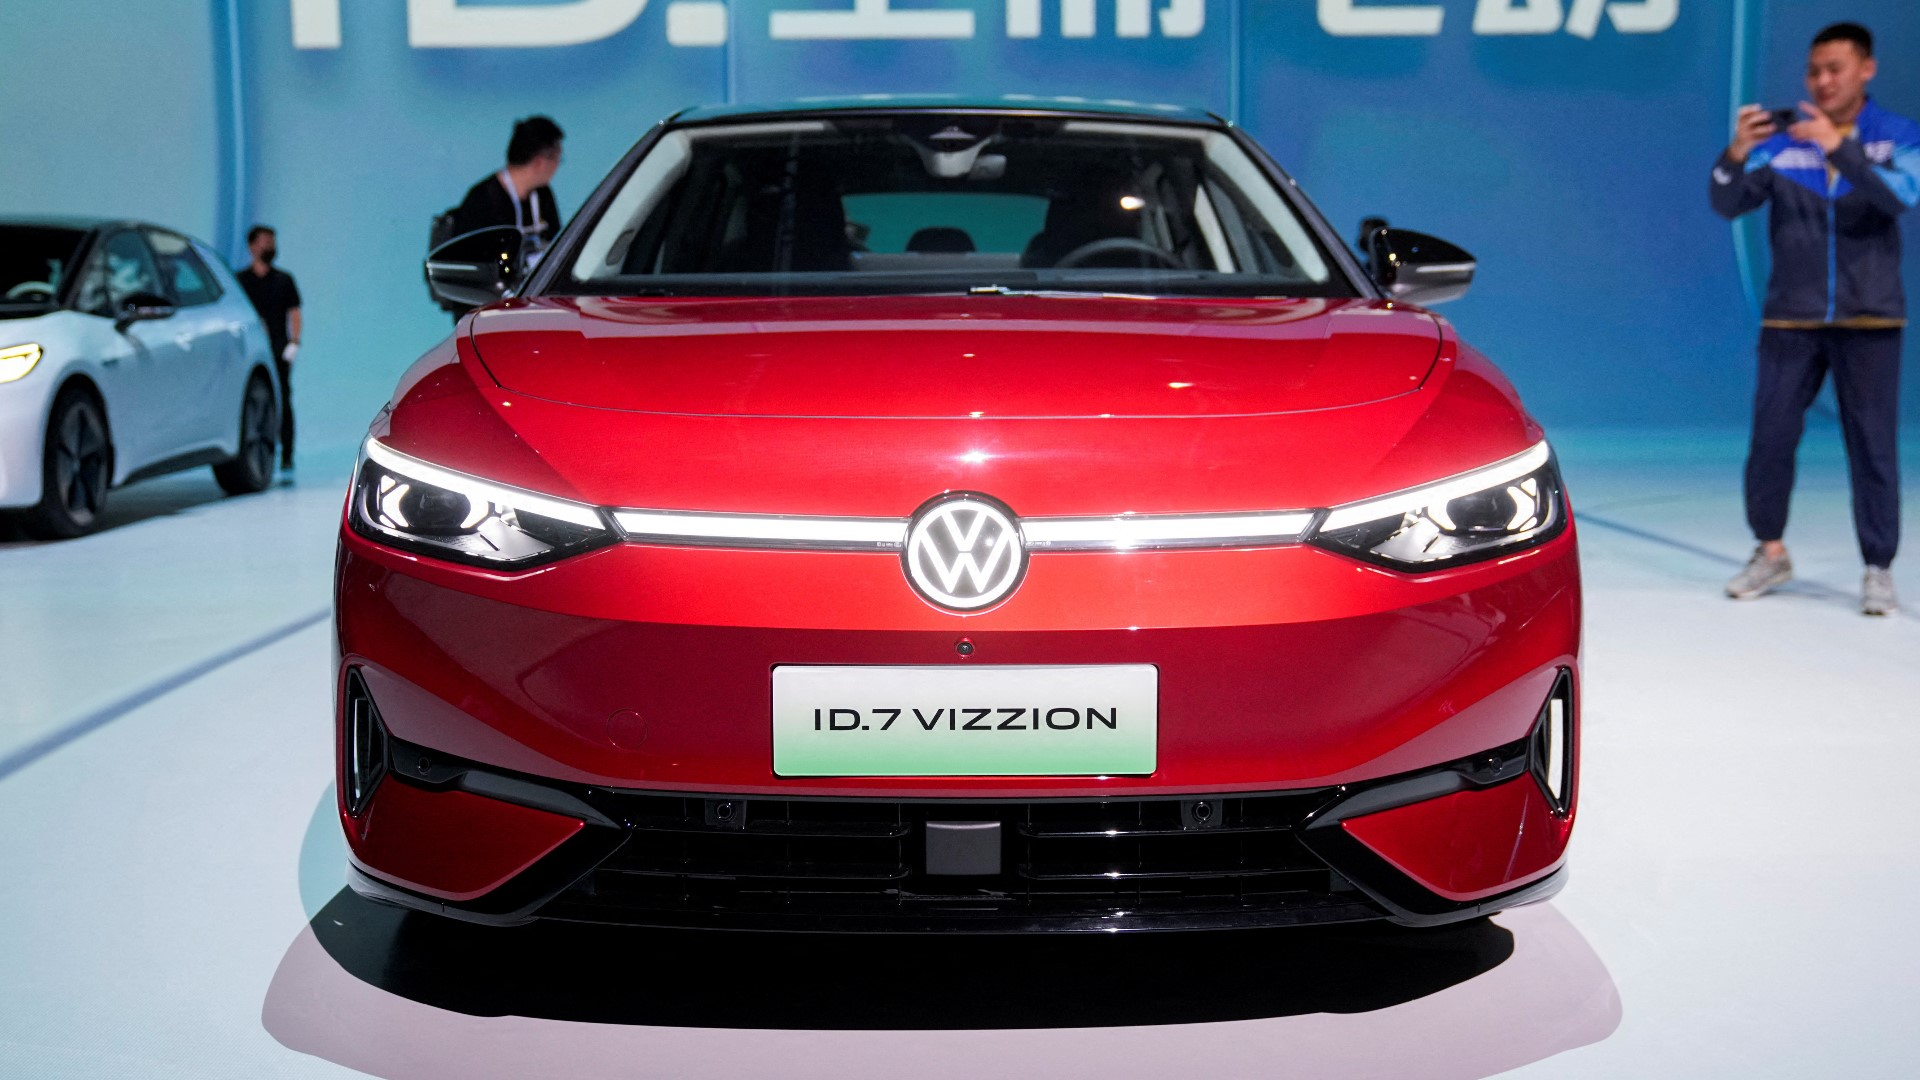 Volkswagen is in a difficult situation in China